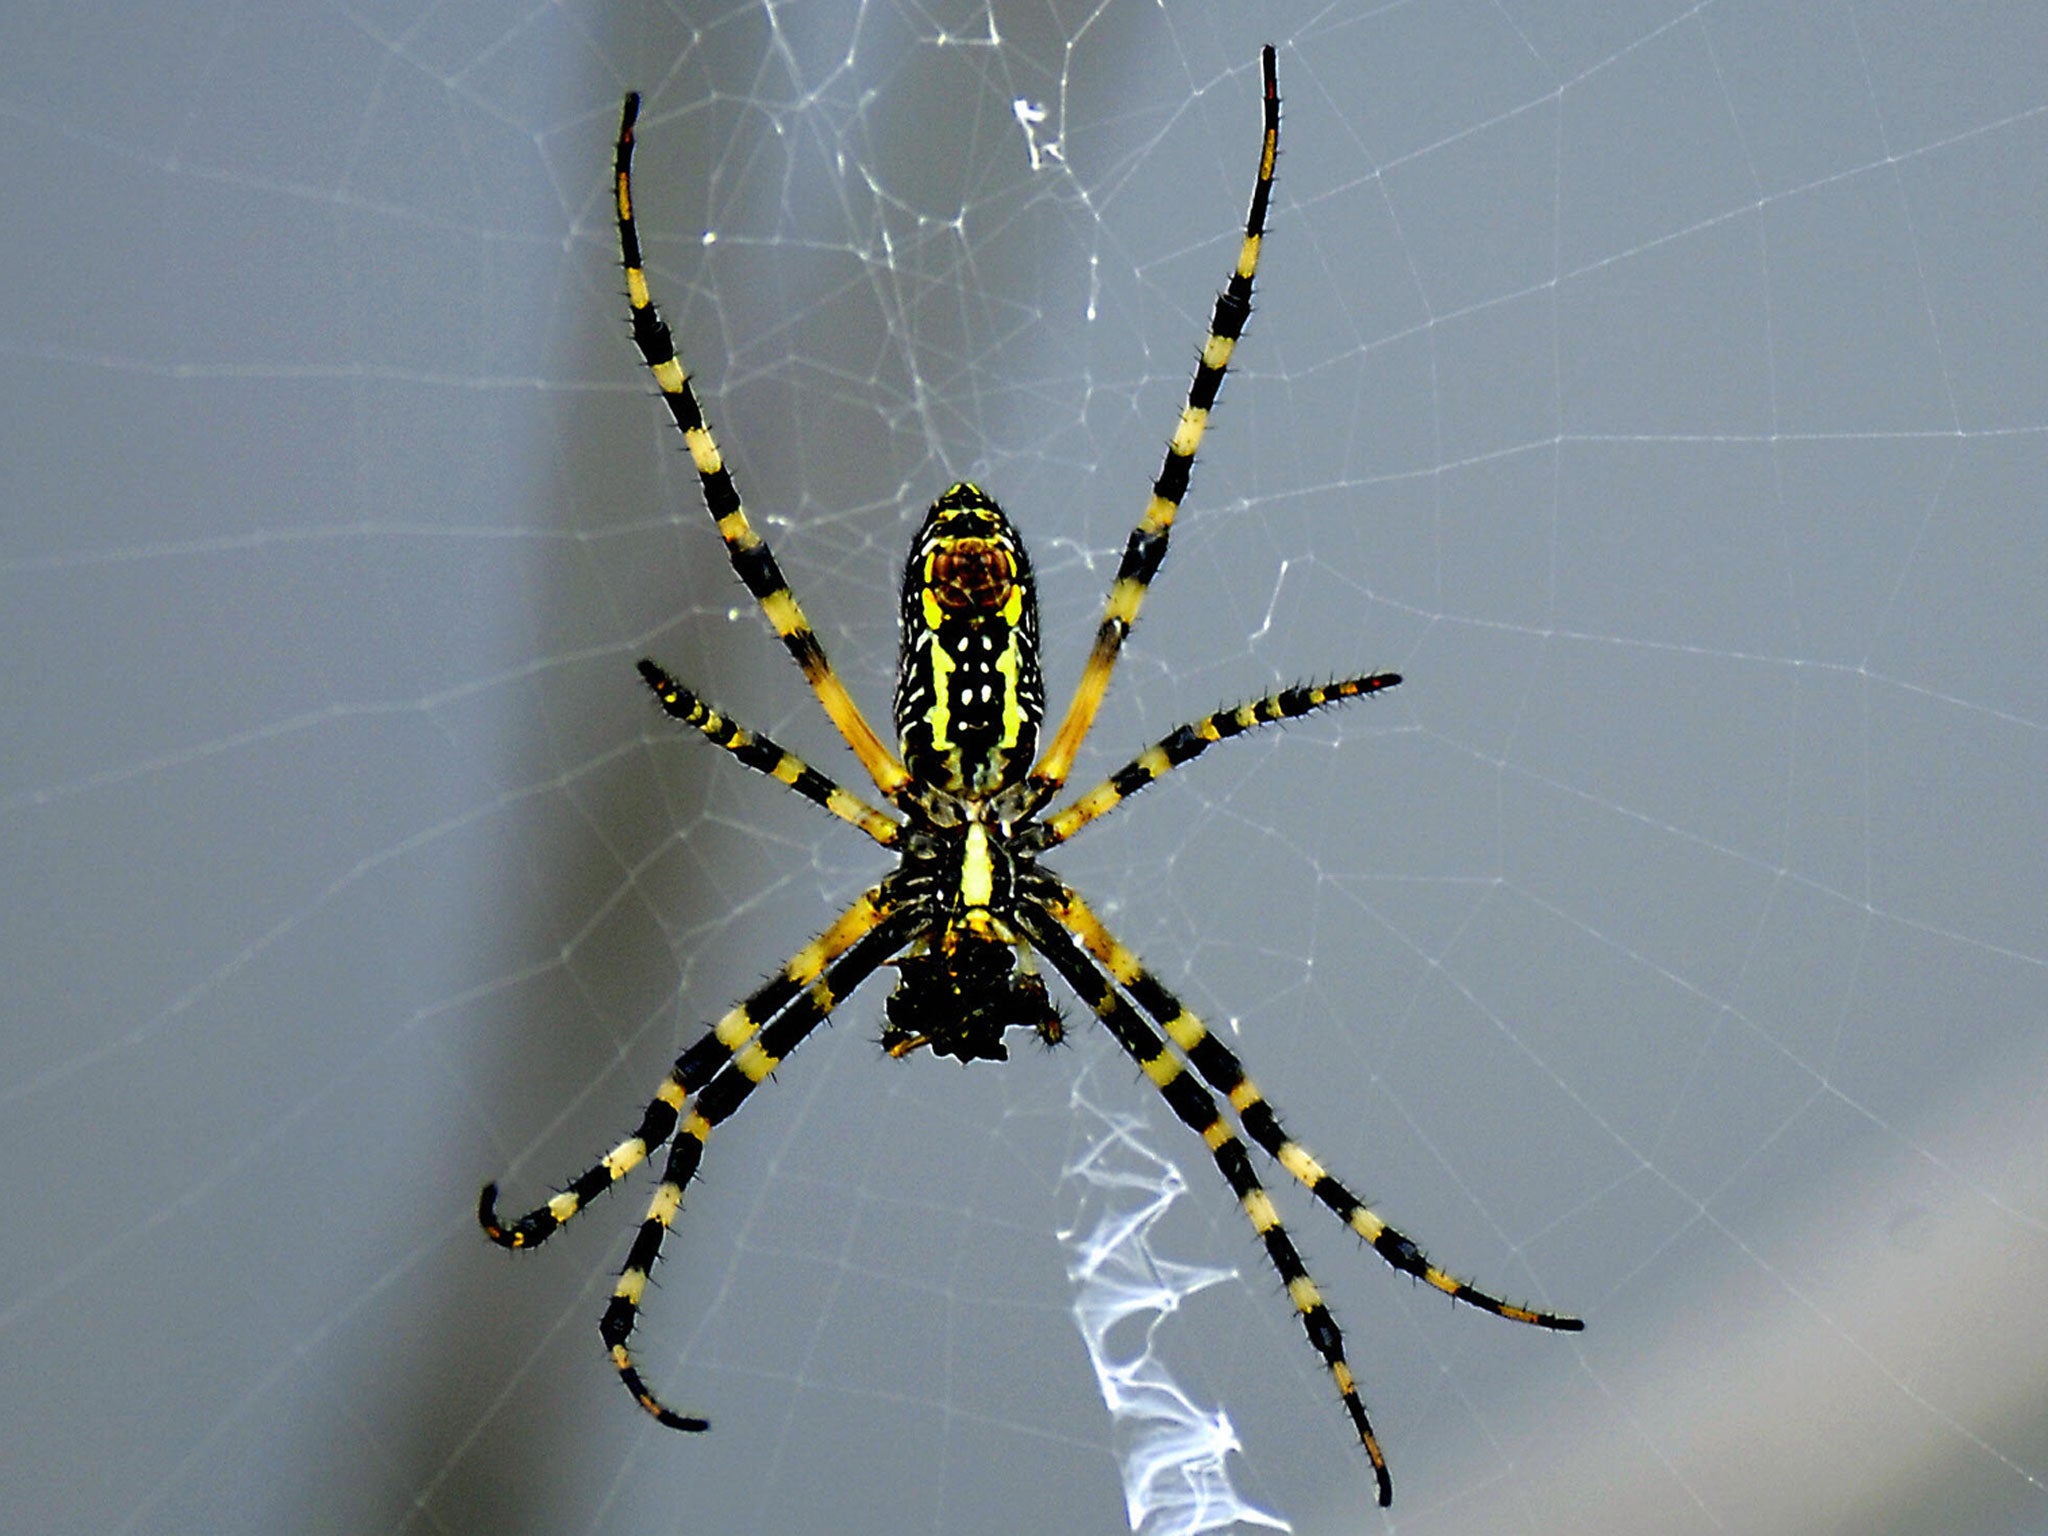 A black and yellow garden spider in its web near the space shuttle Discovery sitting on launch pad 39-A on August 25, 2009 at the Kennedy Space Center in Florida. The launch was scrubbed for a second time due to a faulty liquid hydroden valve that became